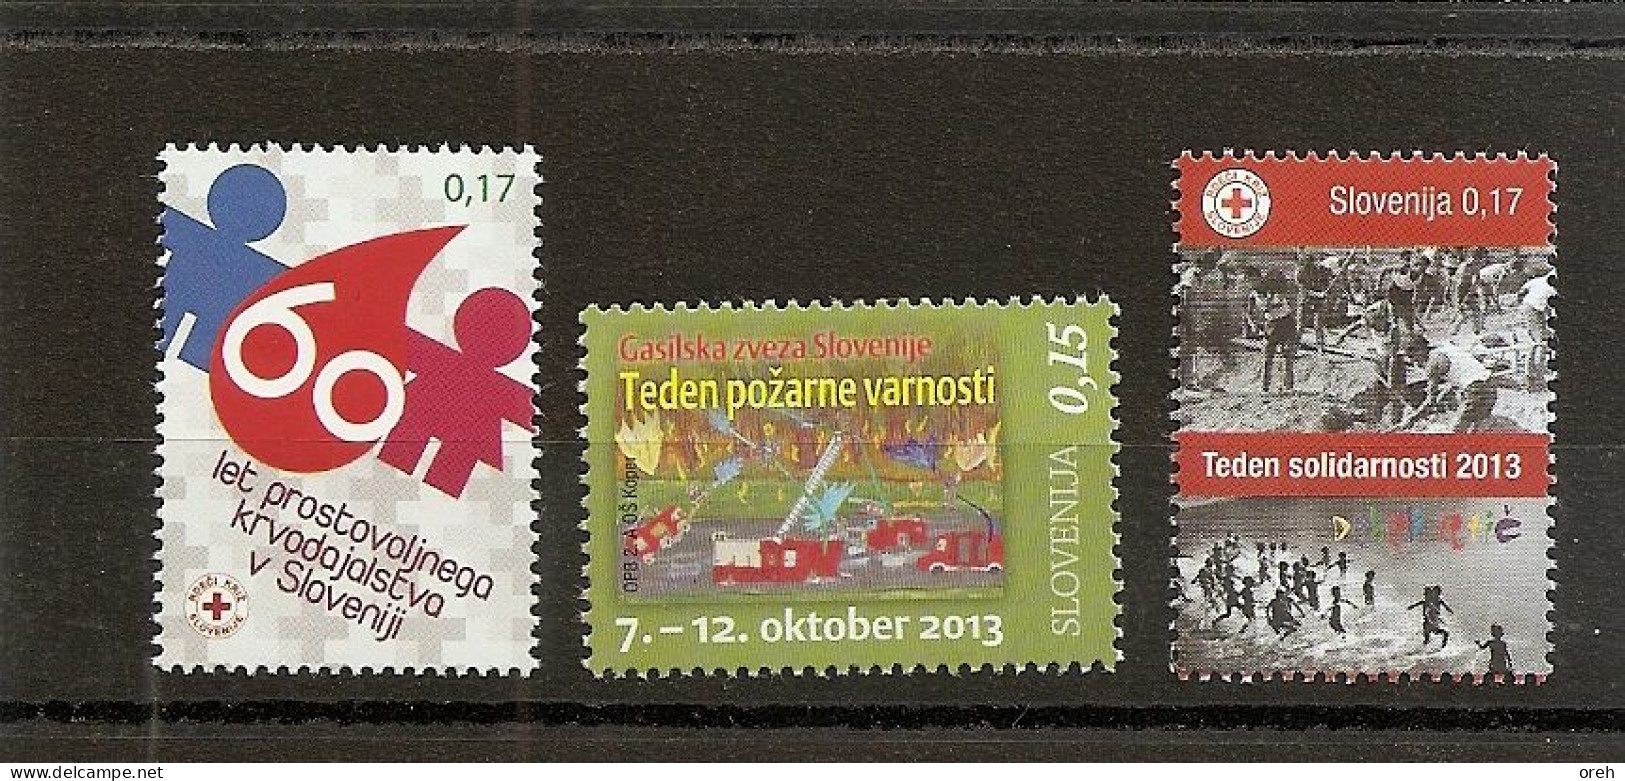 SLOVENIA  2013, RED CROSS,SOLIDARITY,,ADHESIVE,COMPLETE,MNH - Slovénie